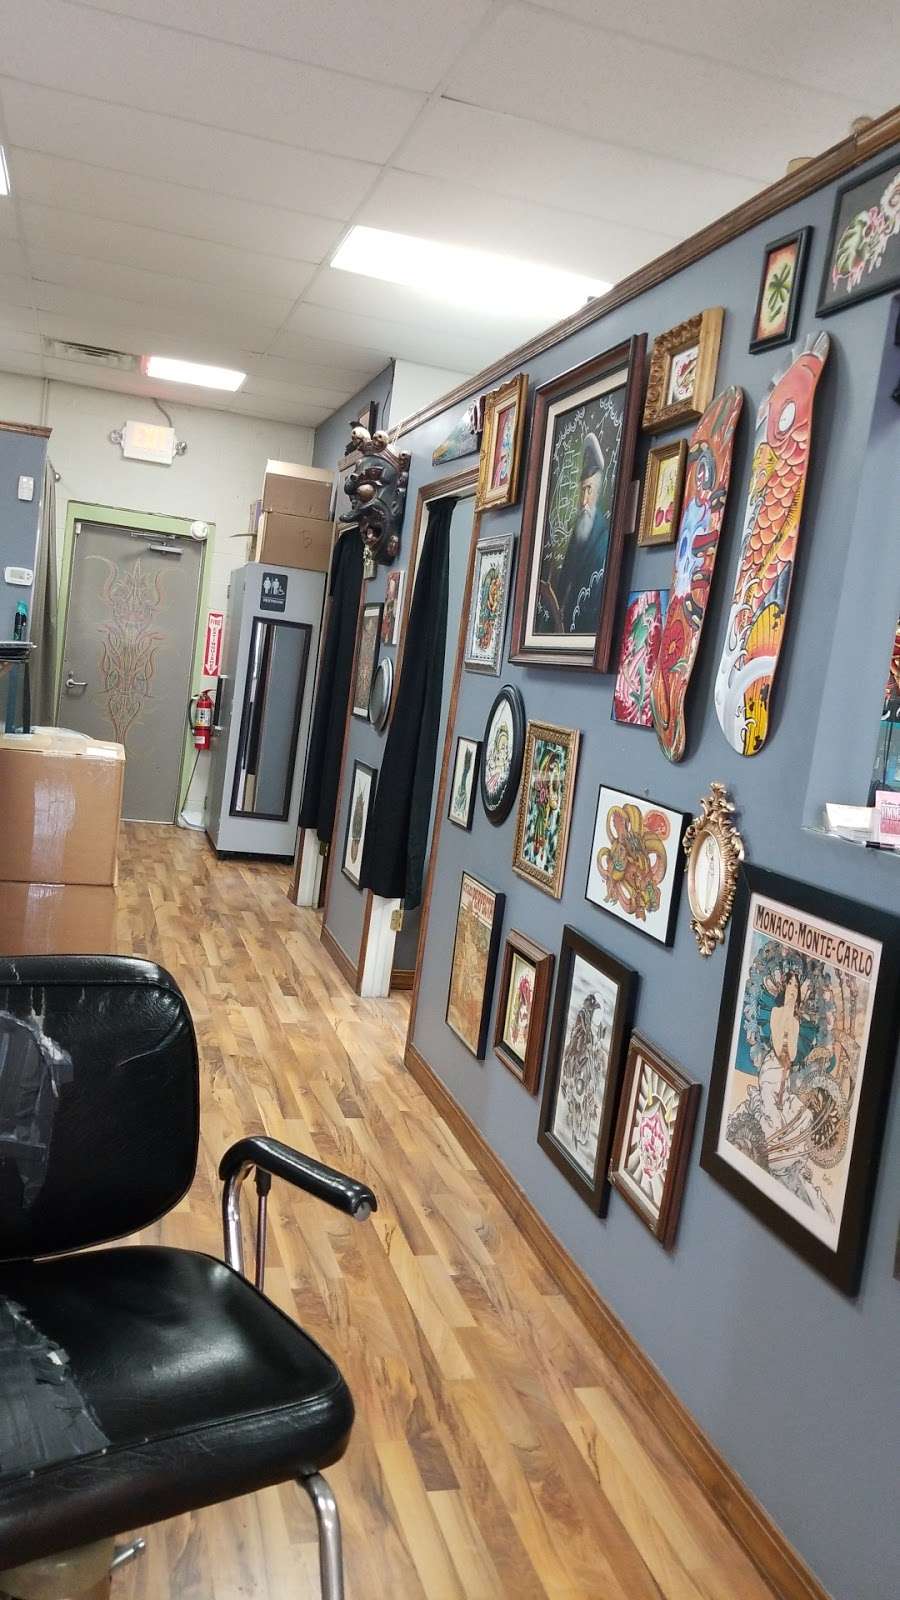 Sure Fire Tattoos | 21583 E Lincoln Hwy, Chicago Heights, IL 60411 | Phone: (708) 758-8287